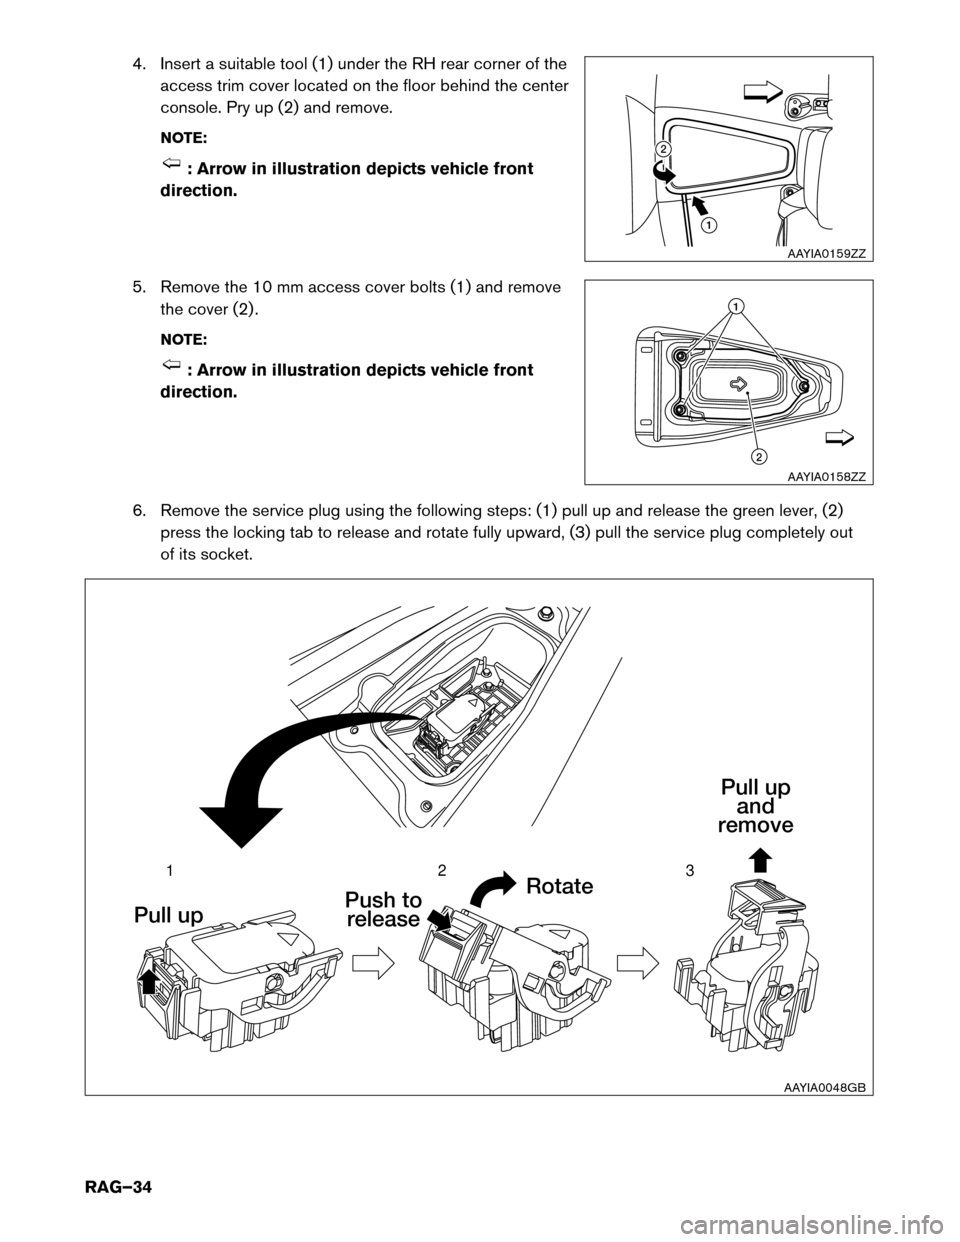 NISSAN LEAF 2016 1.G Roadside Assistance Guide 4. Insert a suitable tool (1) under the RH rear corner of the
access trim cover located on the floor behind the center
console. Pry up (2) and remove.
NOTE: : Arrow in illustration depicts vehicle fro